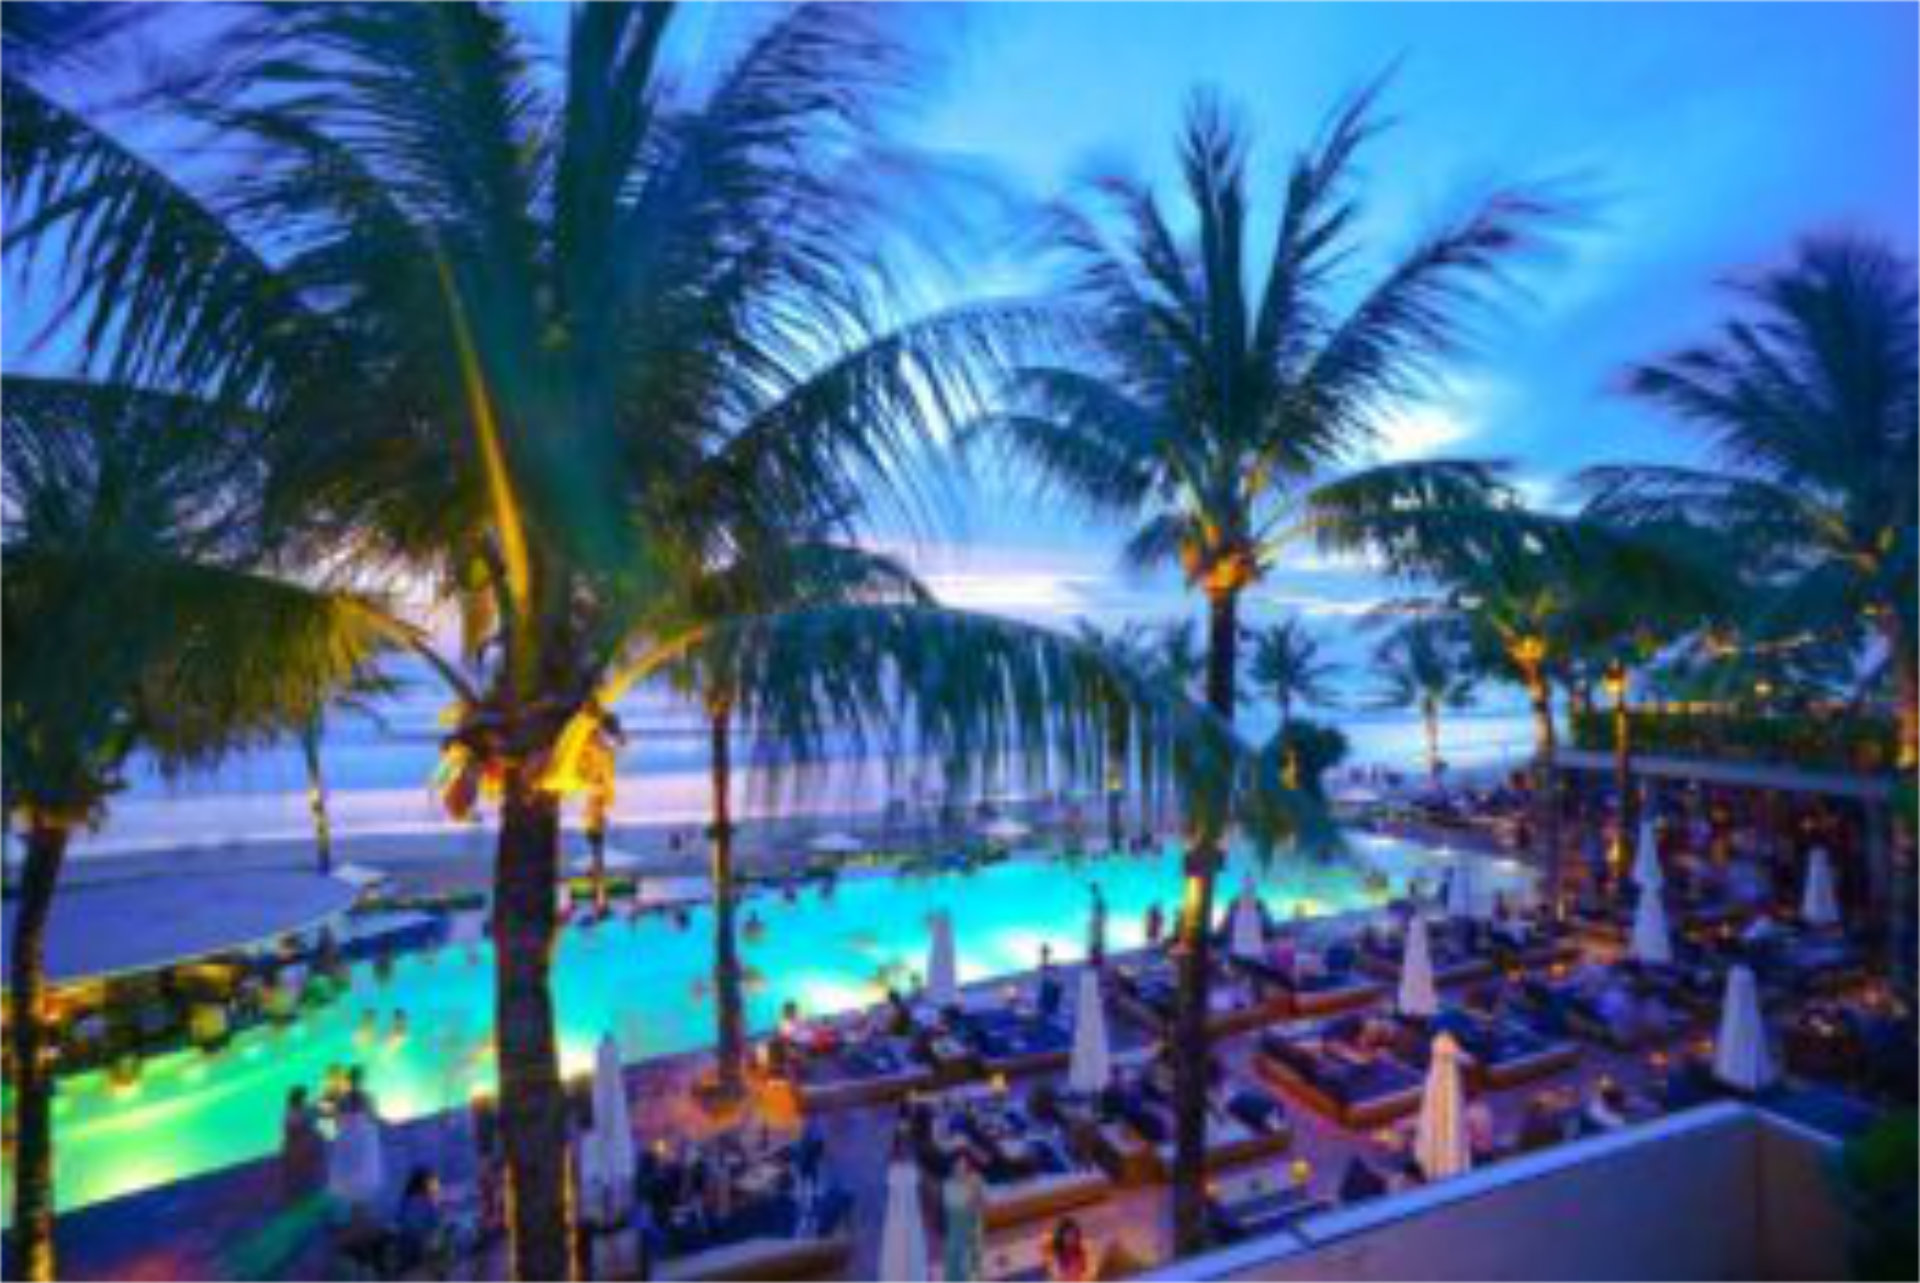 Potato Head Bali is one of the world's most coveted beach clubs and a must-visit for any Indonesian escape - Luxury Escapes